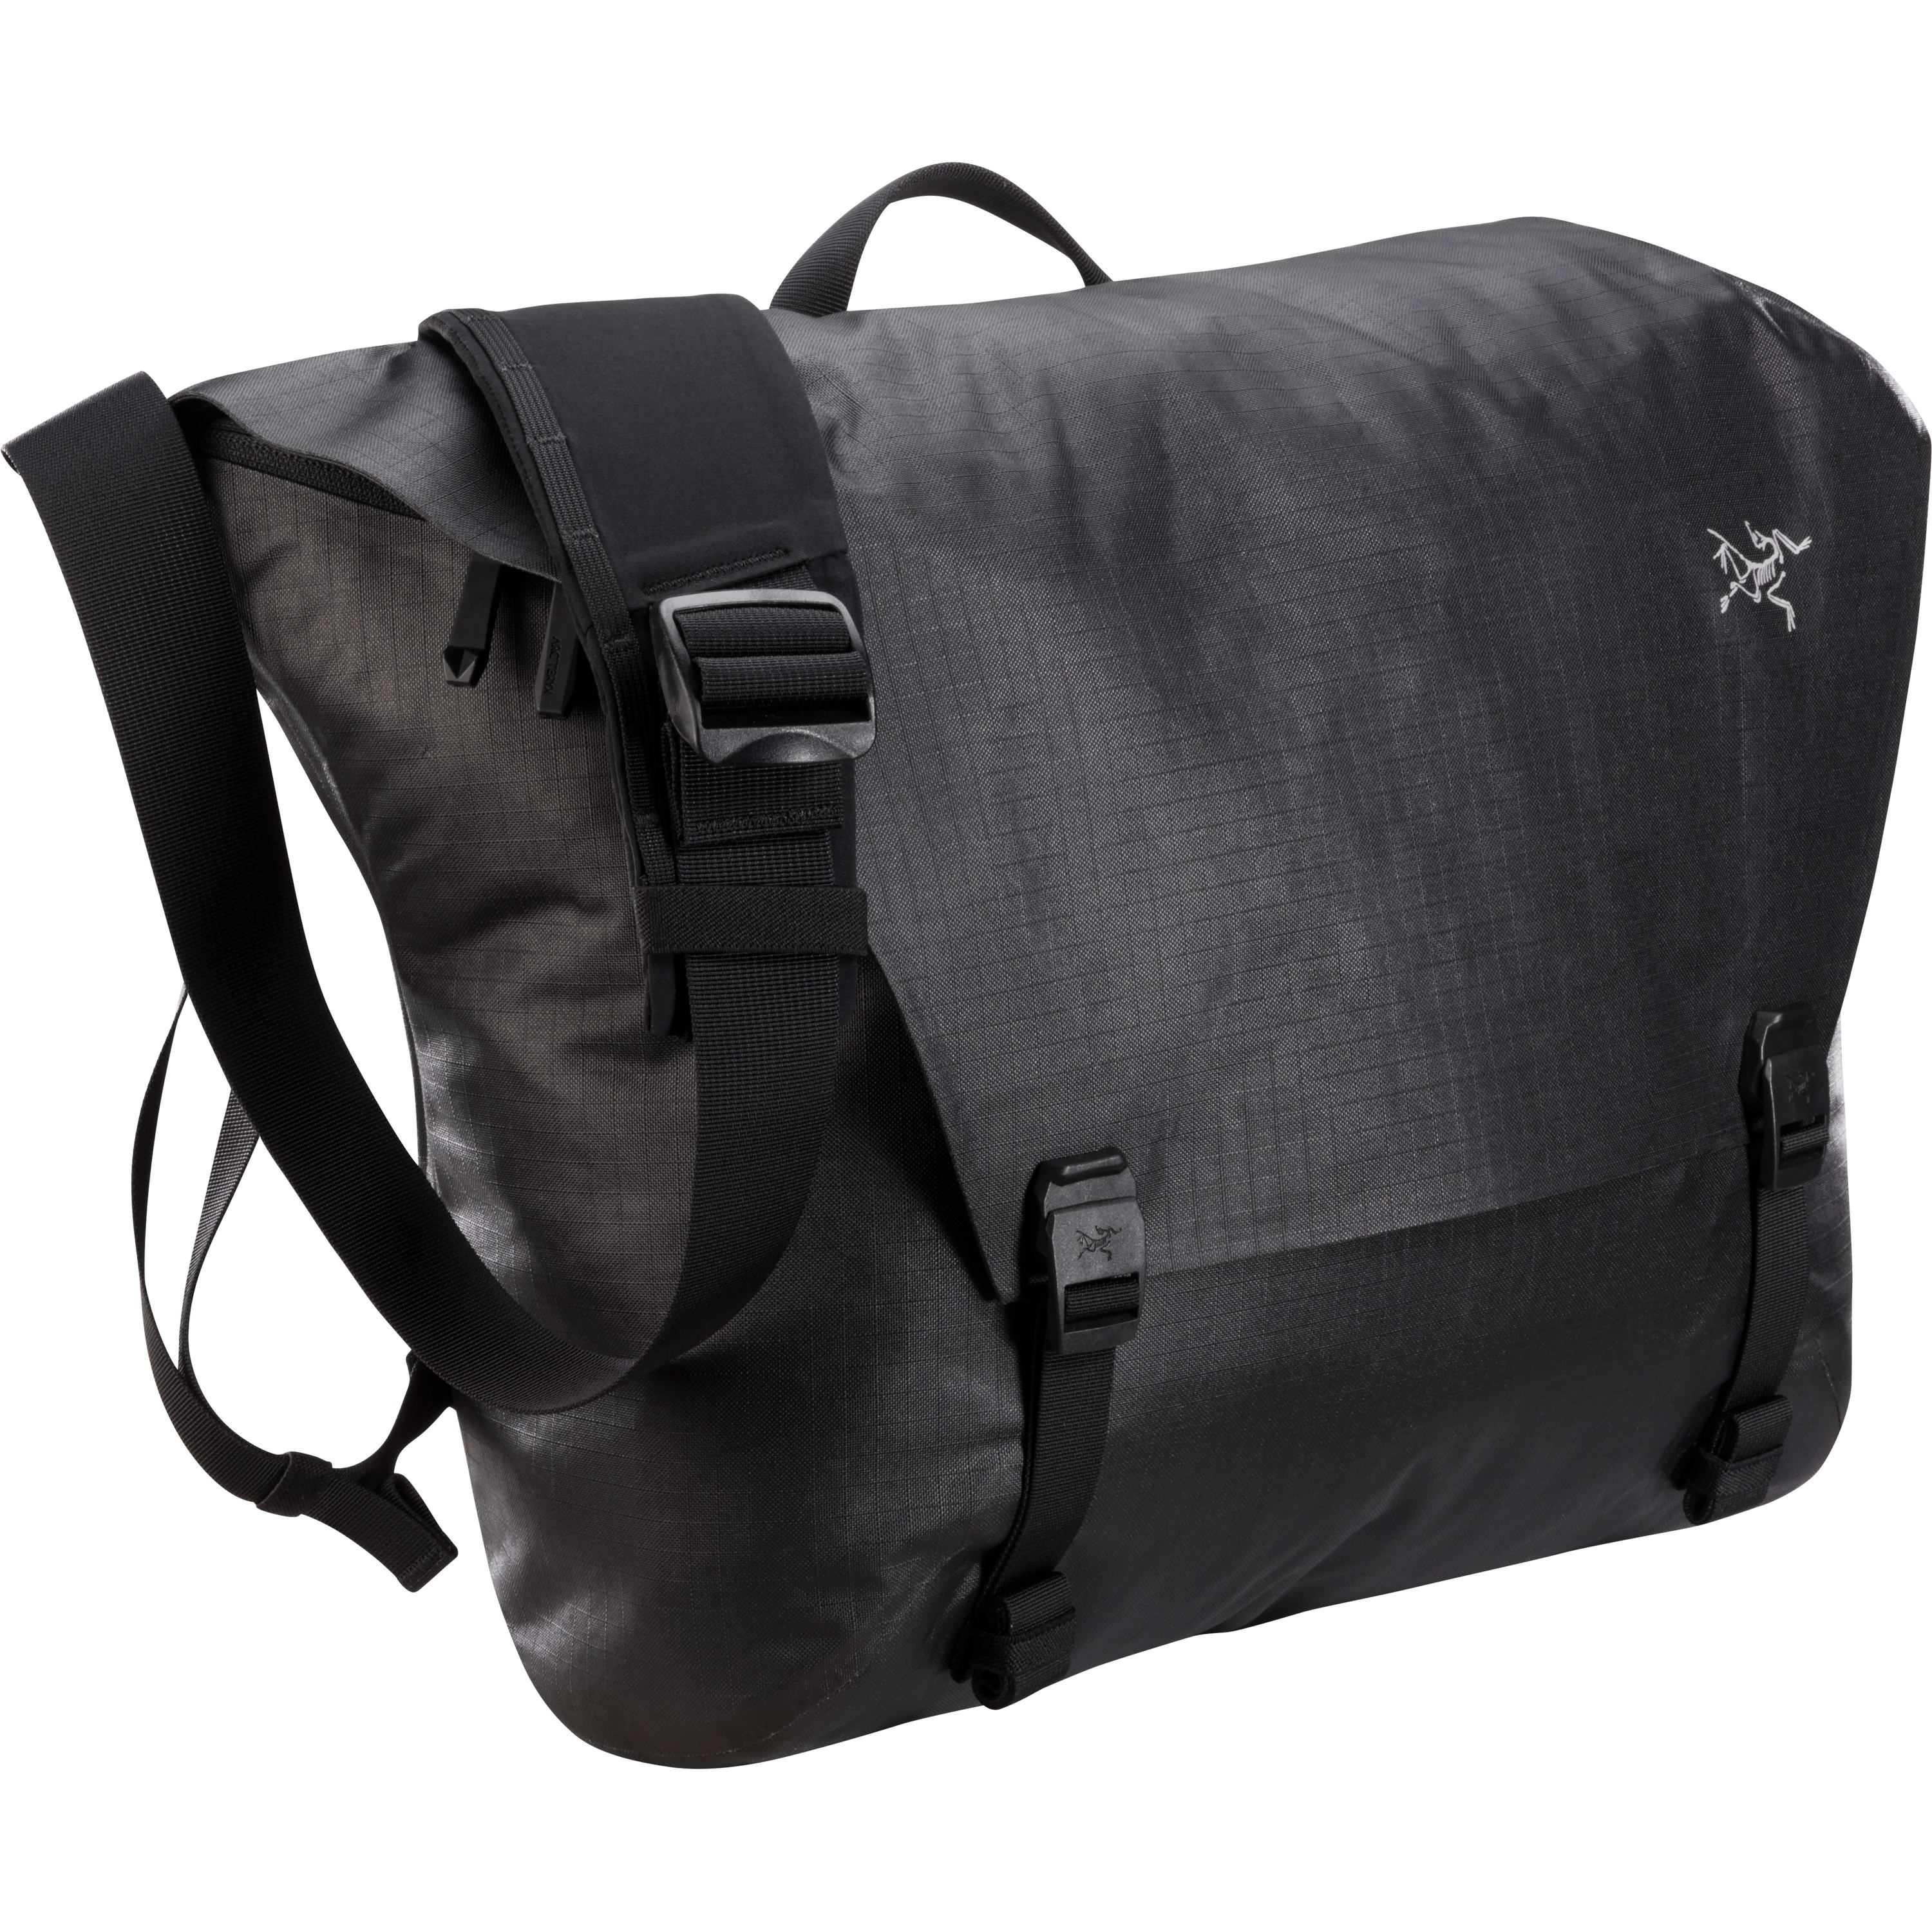 Buy Arc'teryx Granville 16 Courier Bag from Outnorth